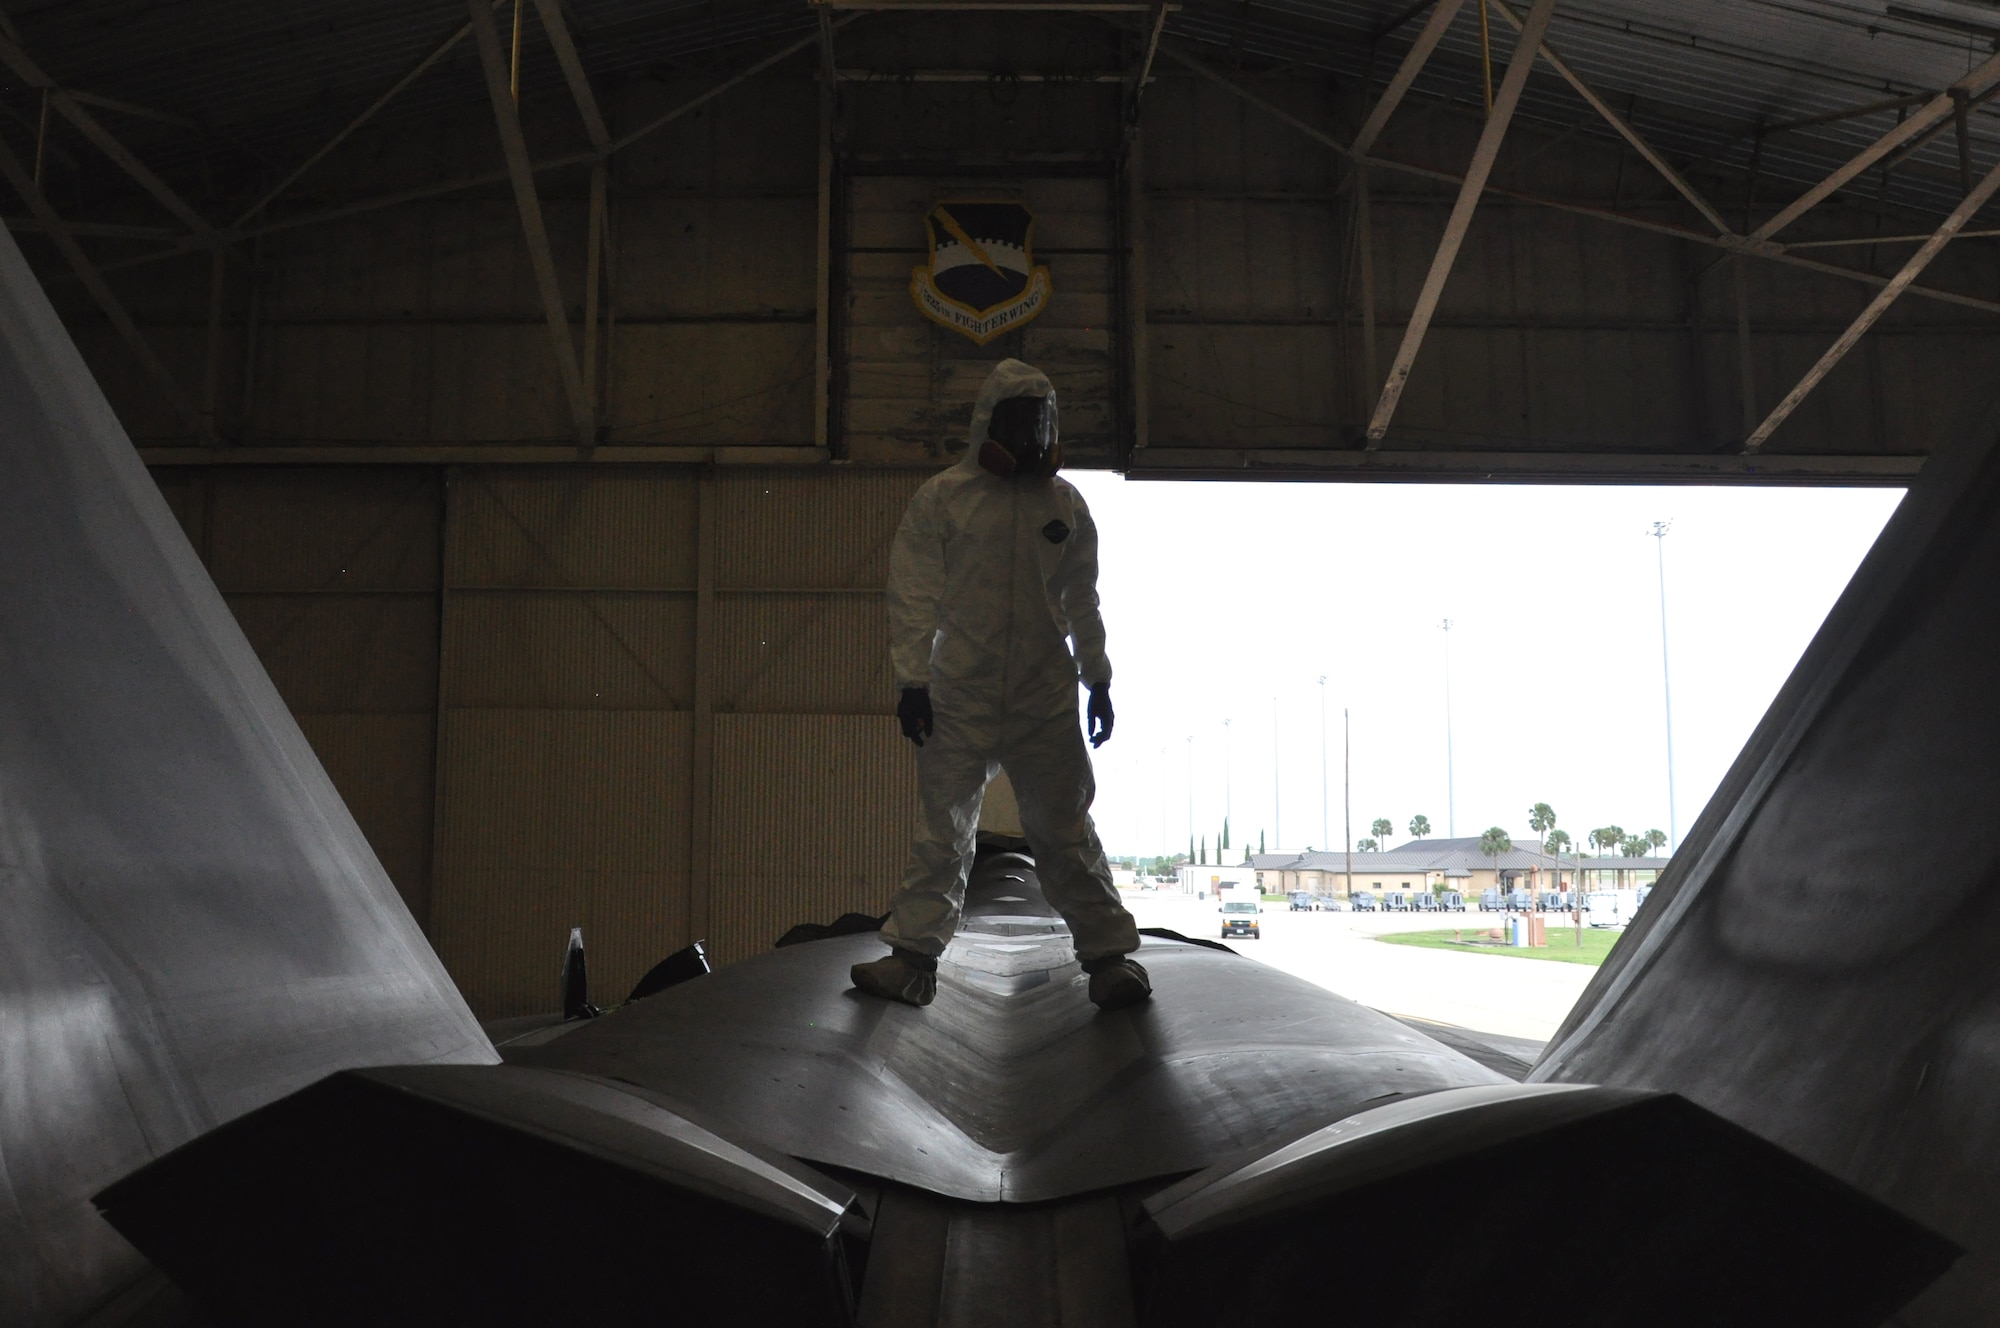 Airman 1st Class Freddie Newman, 325th MXS Low Observable apprentice, poses on top of an F-22 Raptor Aug. 1 at Tyndall Air Force Base. The 325th Maintenance Squadron Low Observable makes sure the F-22 s at Tyndall maintain their stealth capabilities by restoring and maintaining the Low Observable coatings on the aircraft. (U.S. Air Force photo by Airman 1st Class Alex Echols)